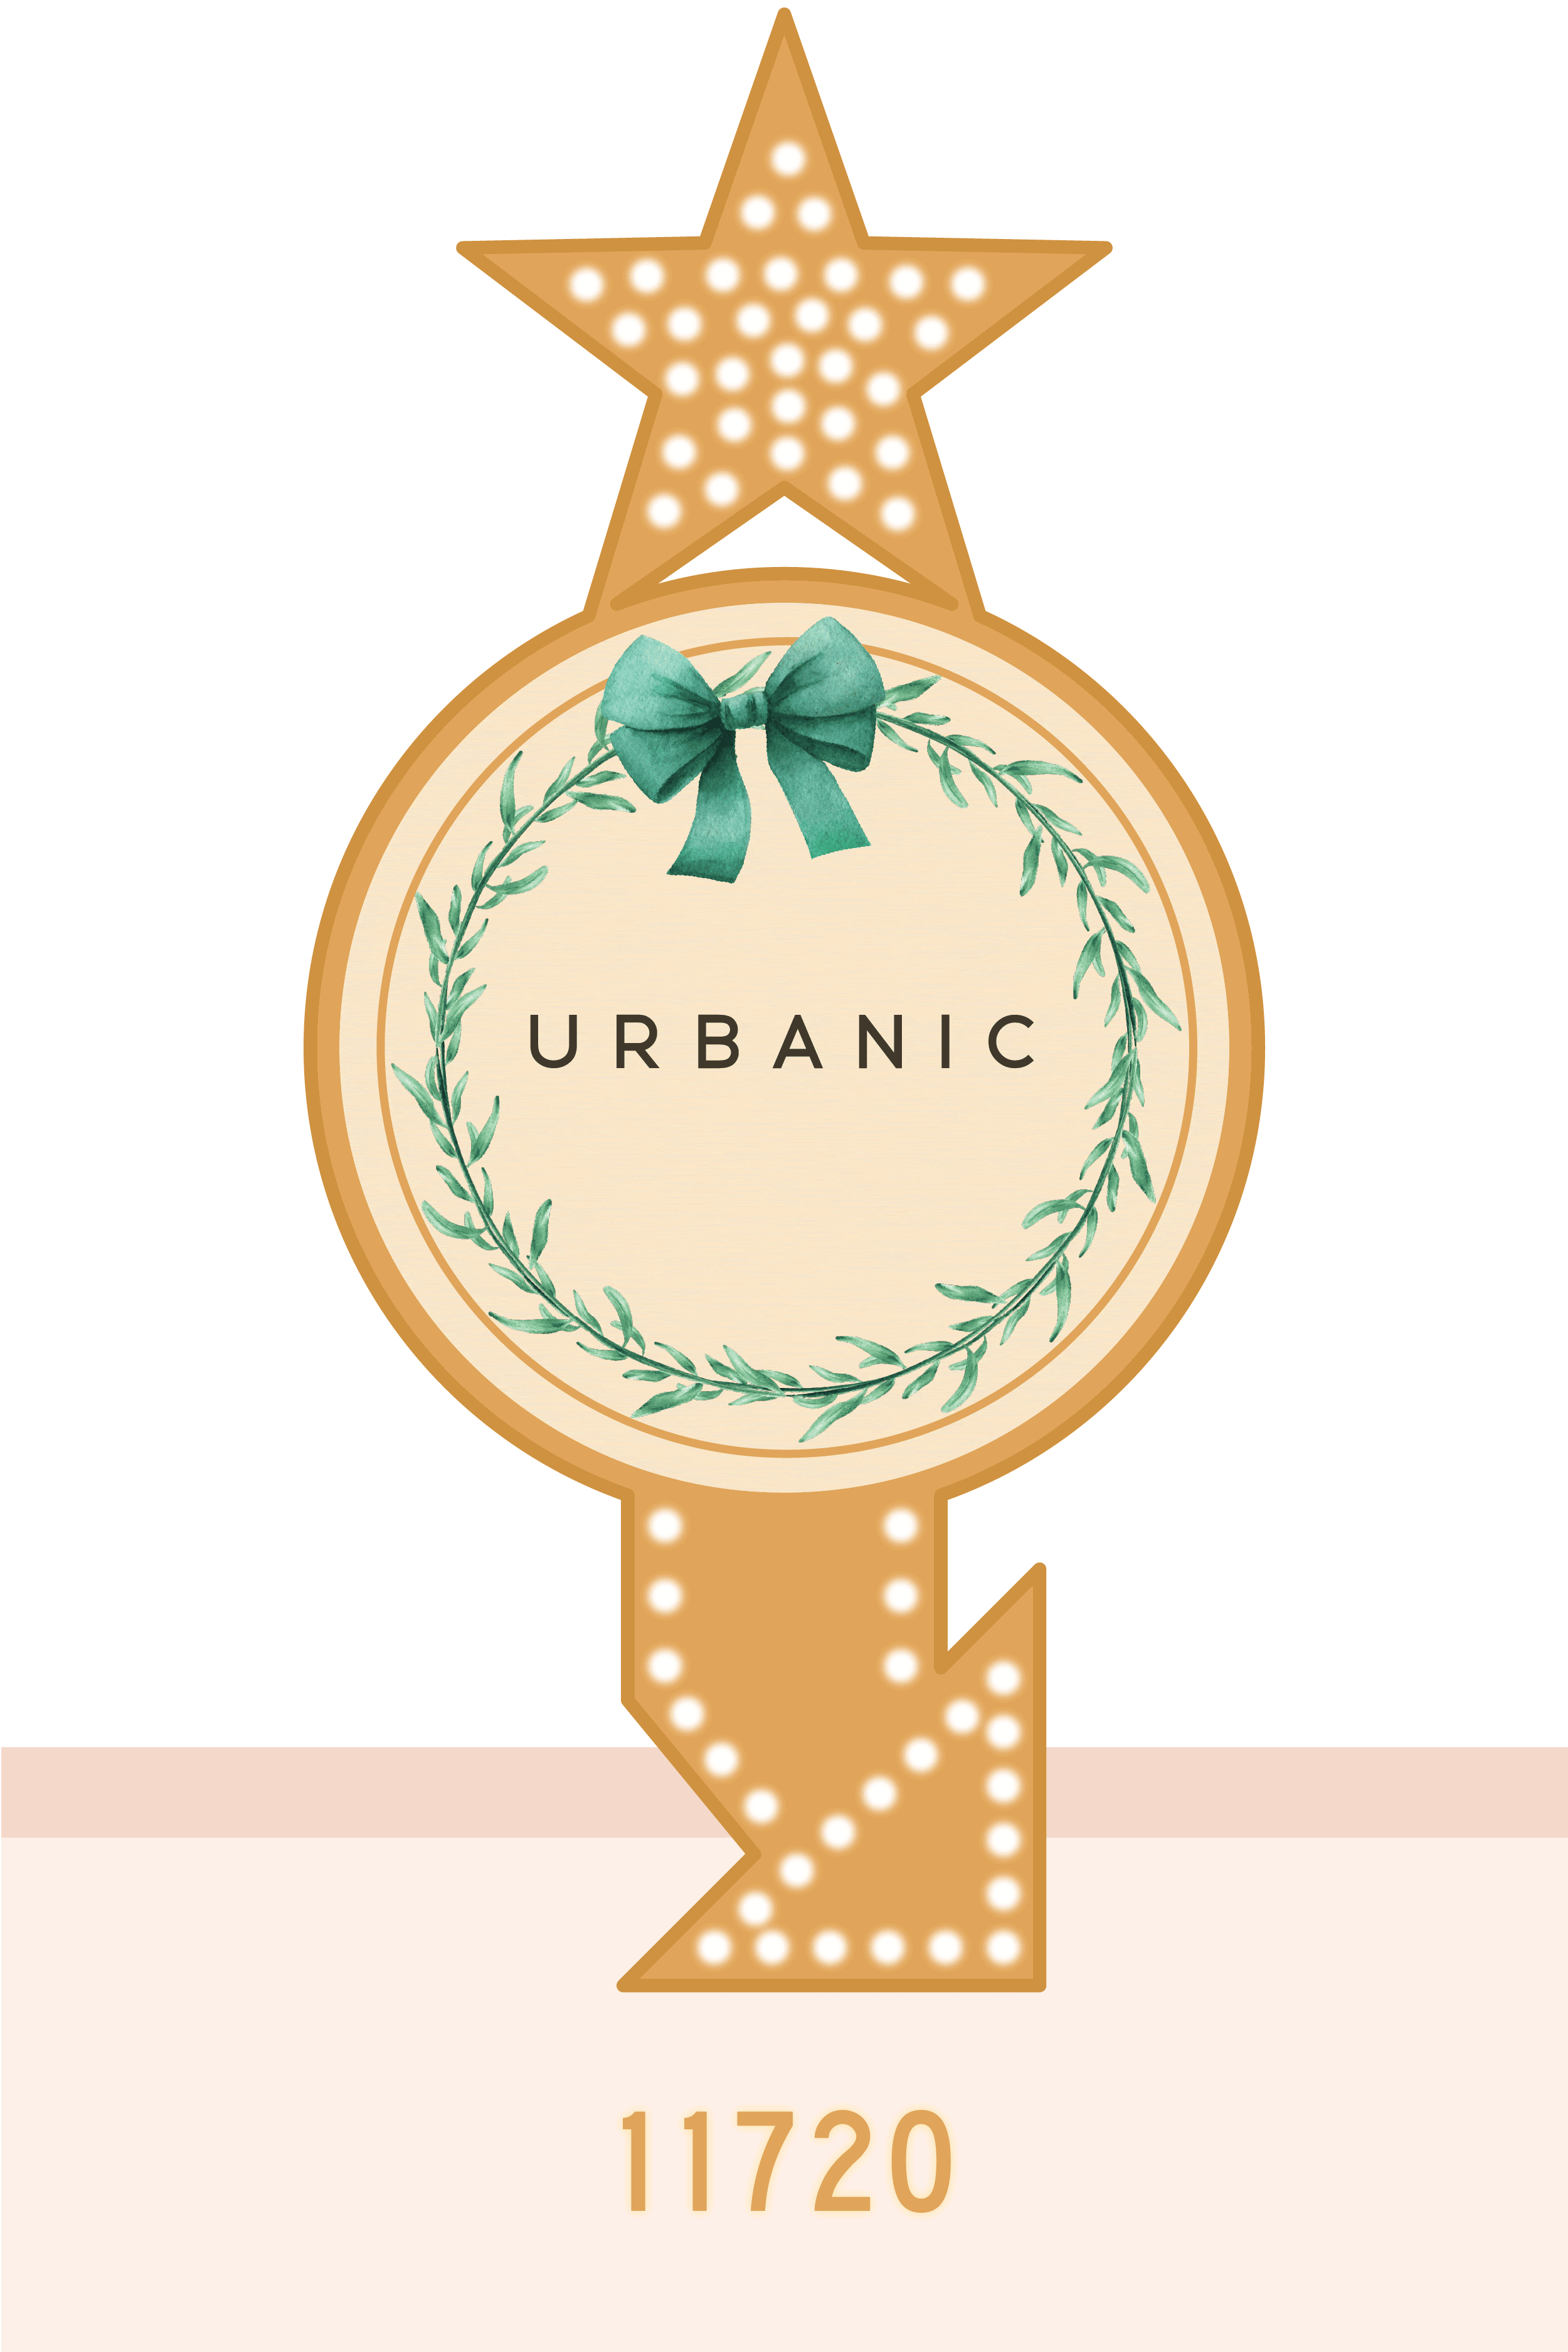 urbanic paper boutique los angeles california gifts stationery holiday holidays season kick off open house sign